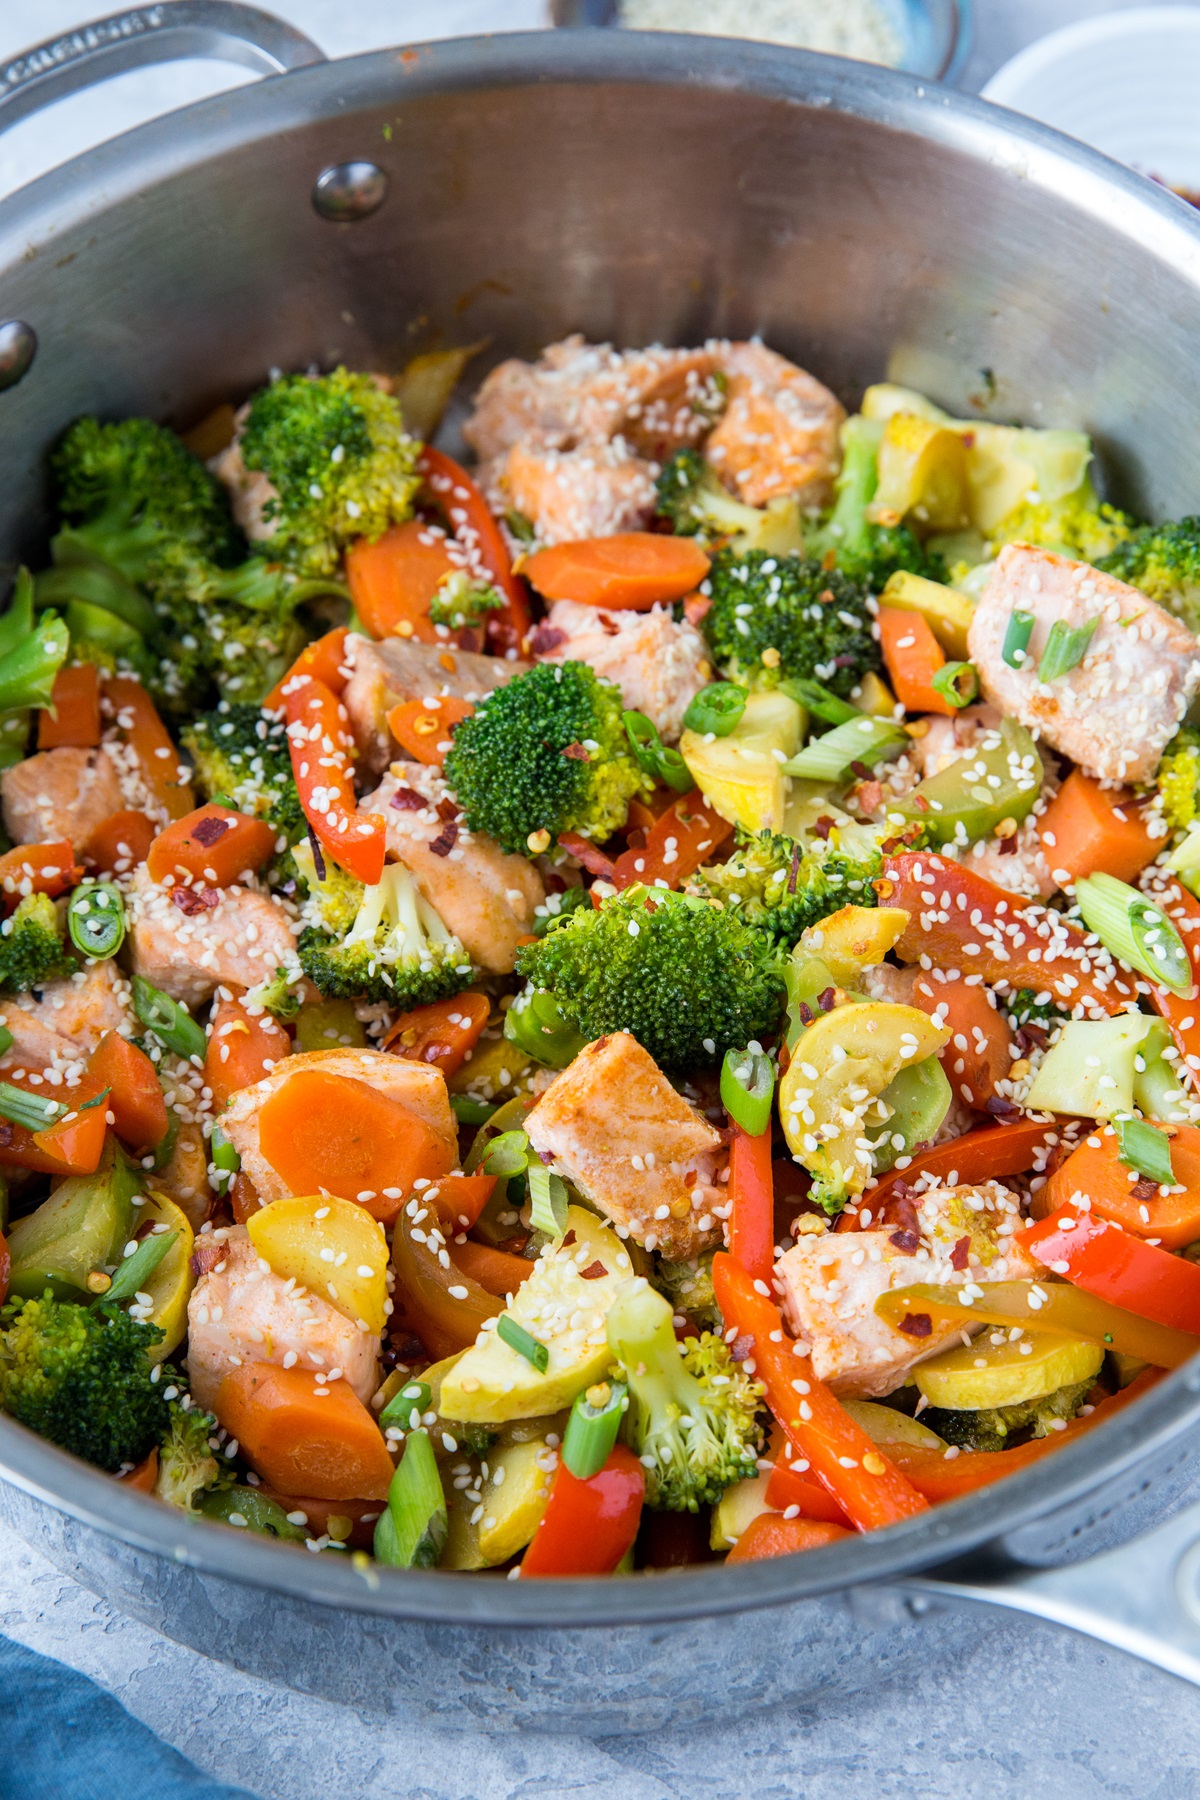 Stainless steel skillet with salmon stir fry in it, ready to serve.